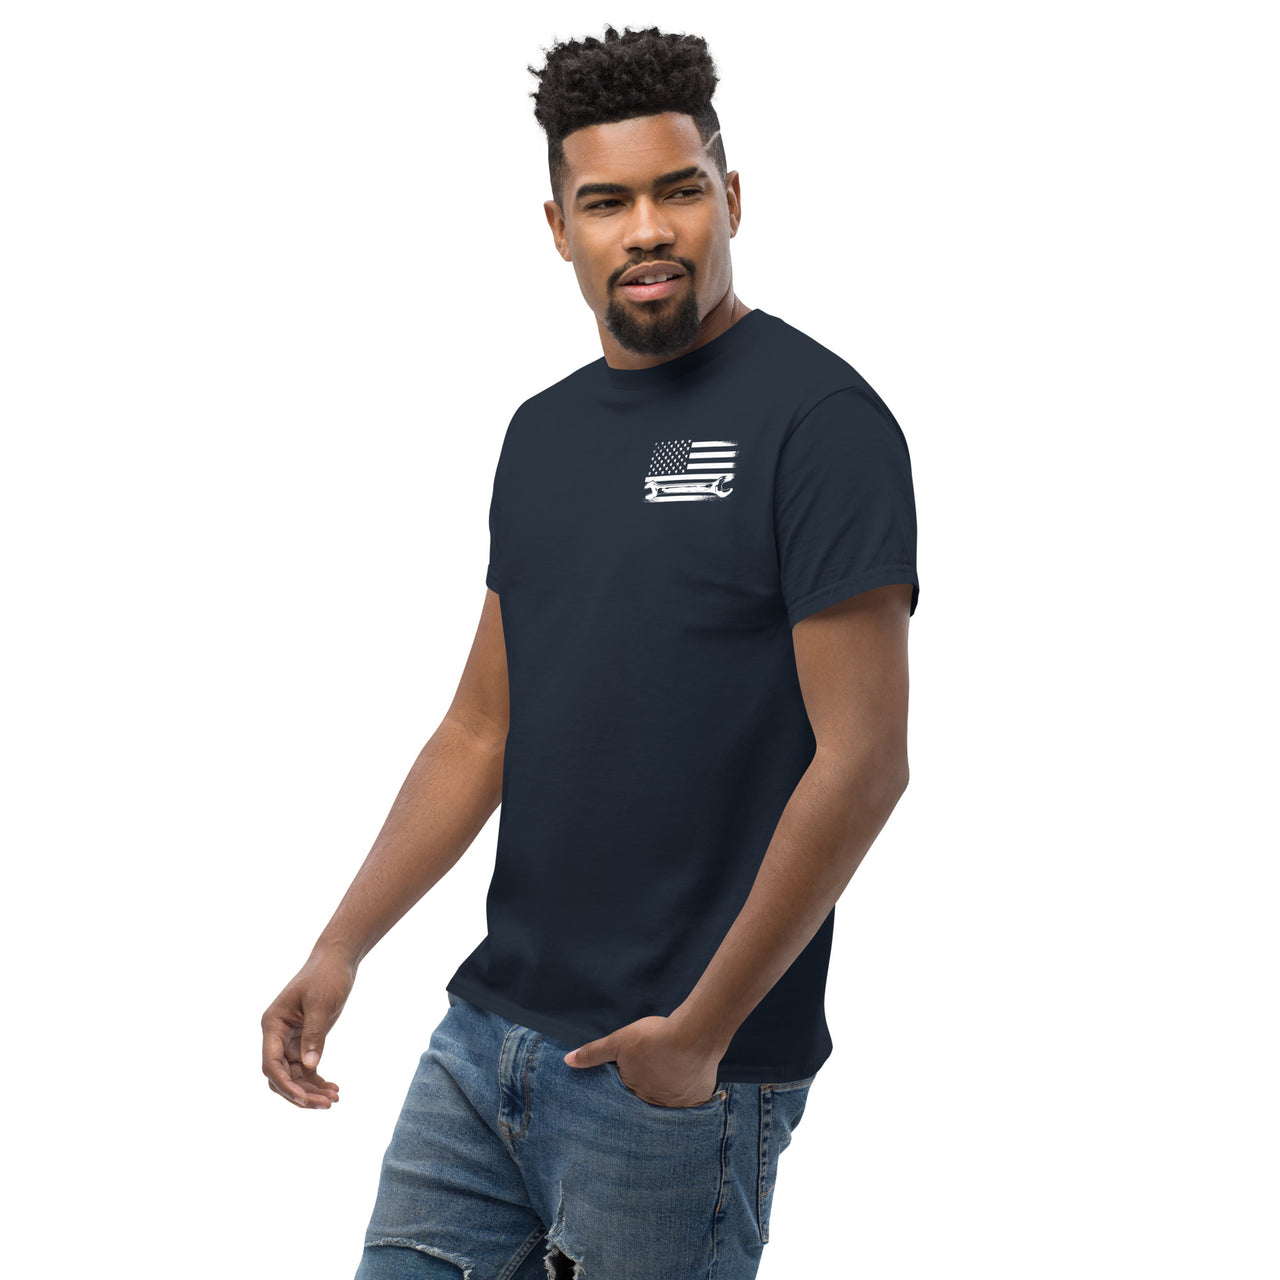 Mechanic T-Shirt - I Fix What You Cant modeled in navy